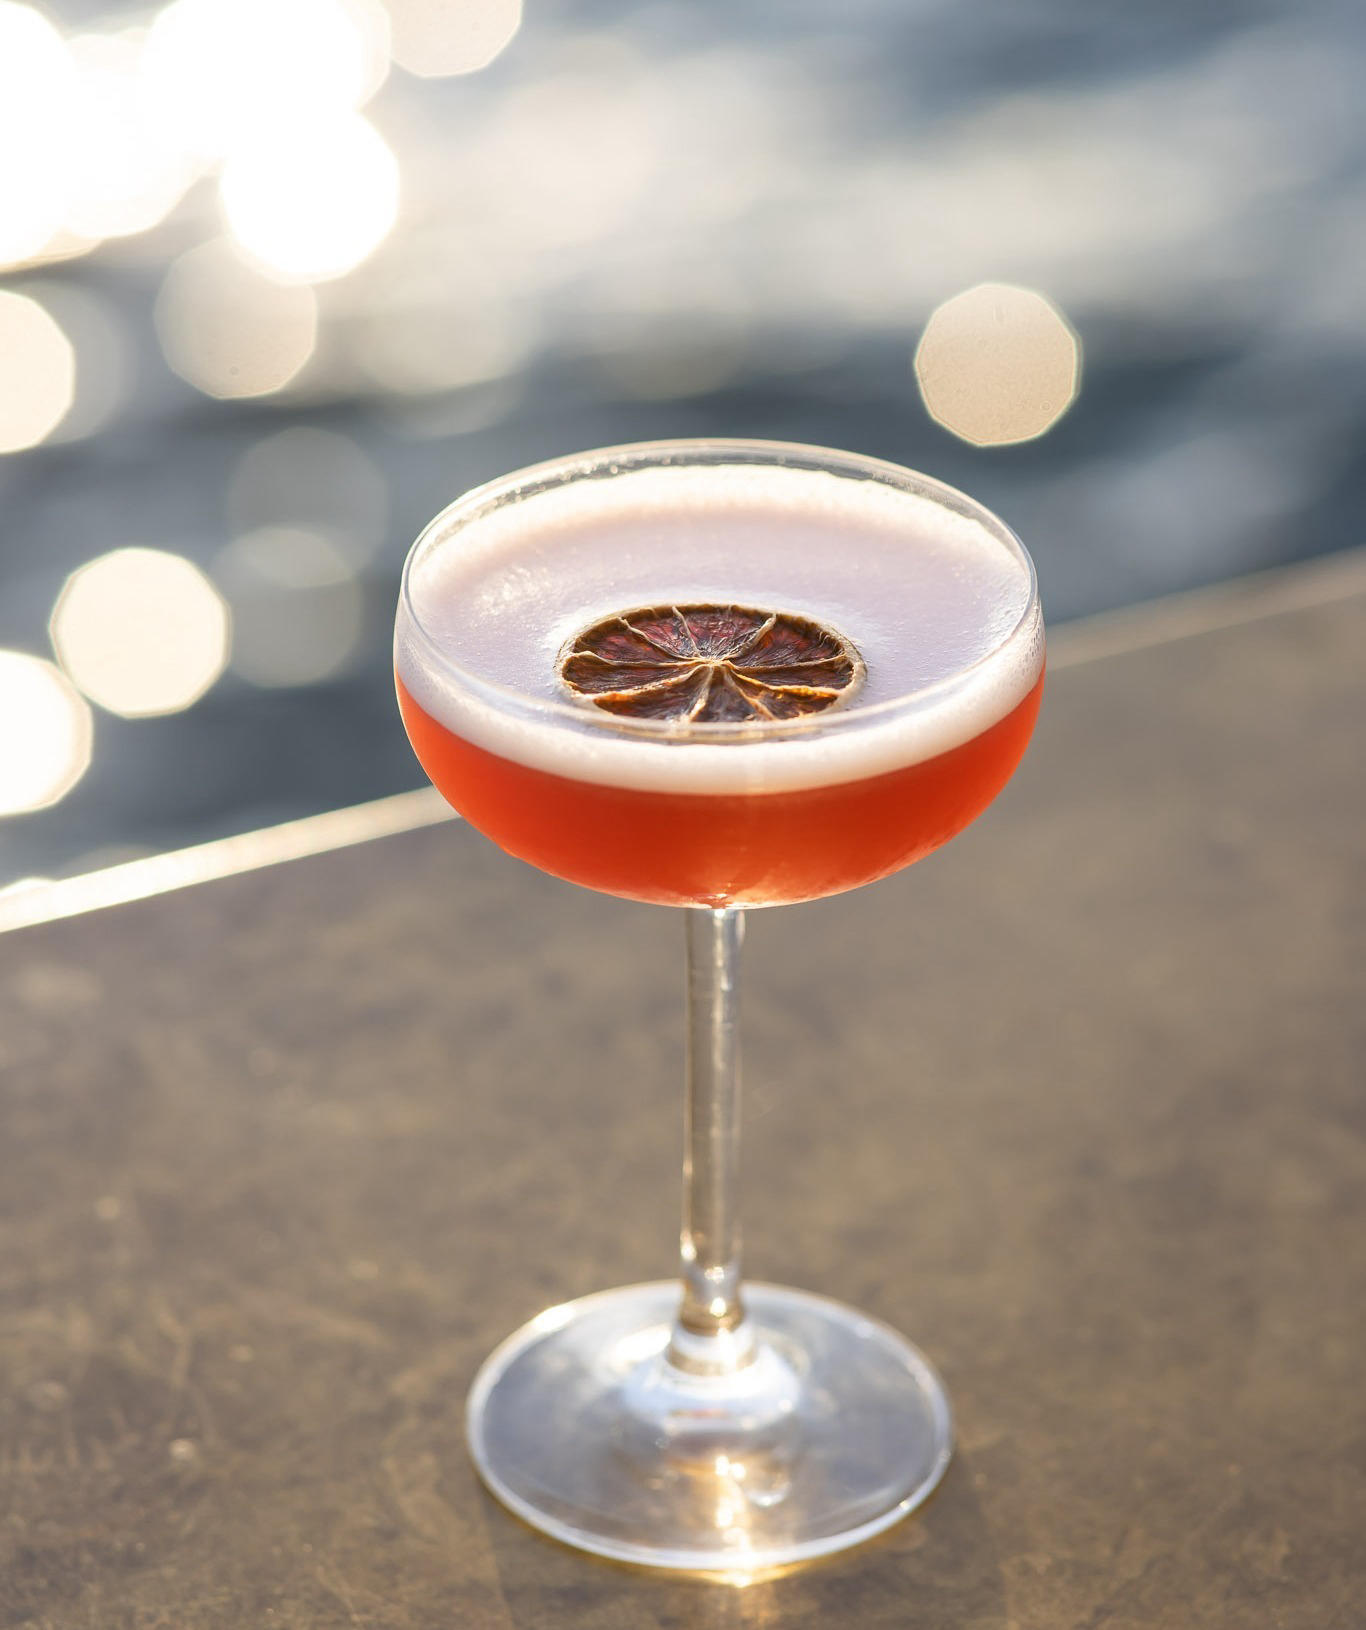 Unwind waterside this Autumn, with one of our signature sunset cocktails